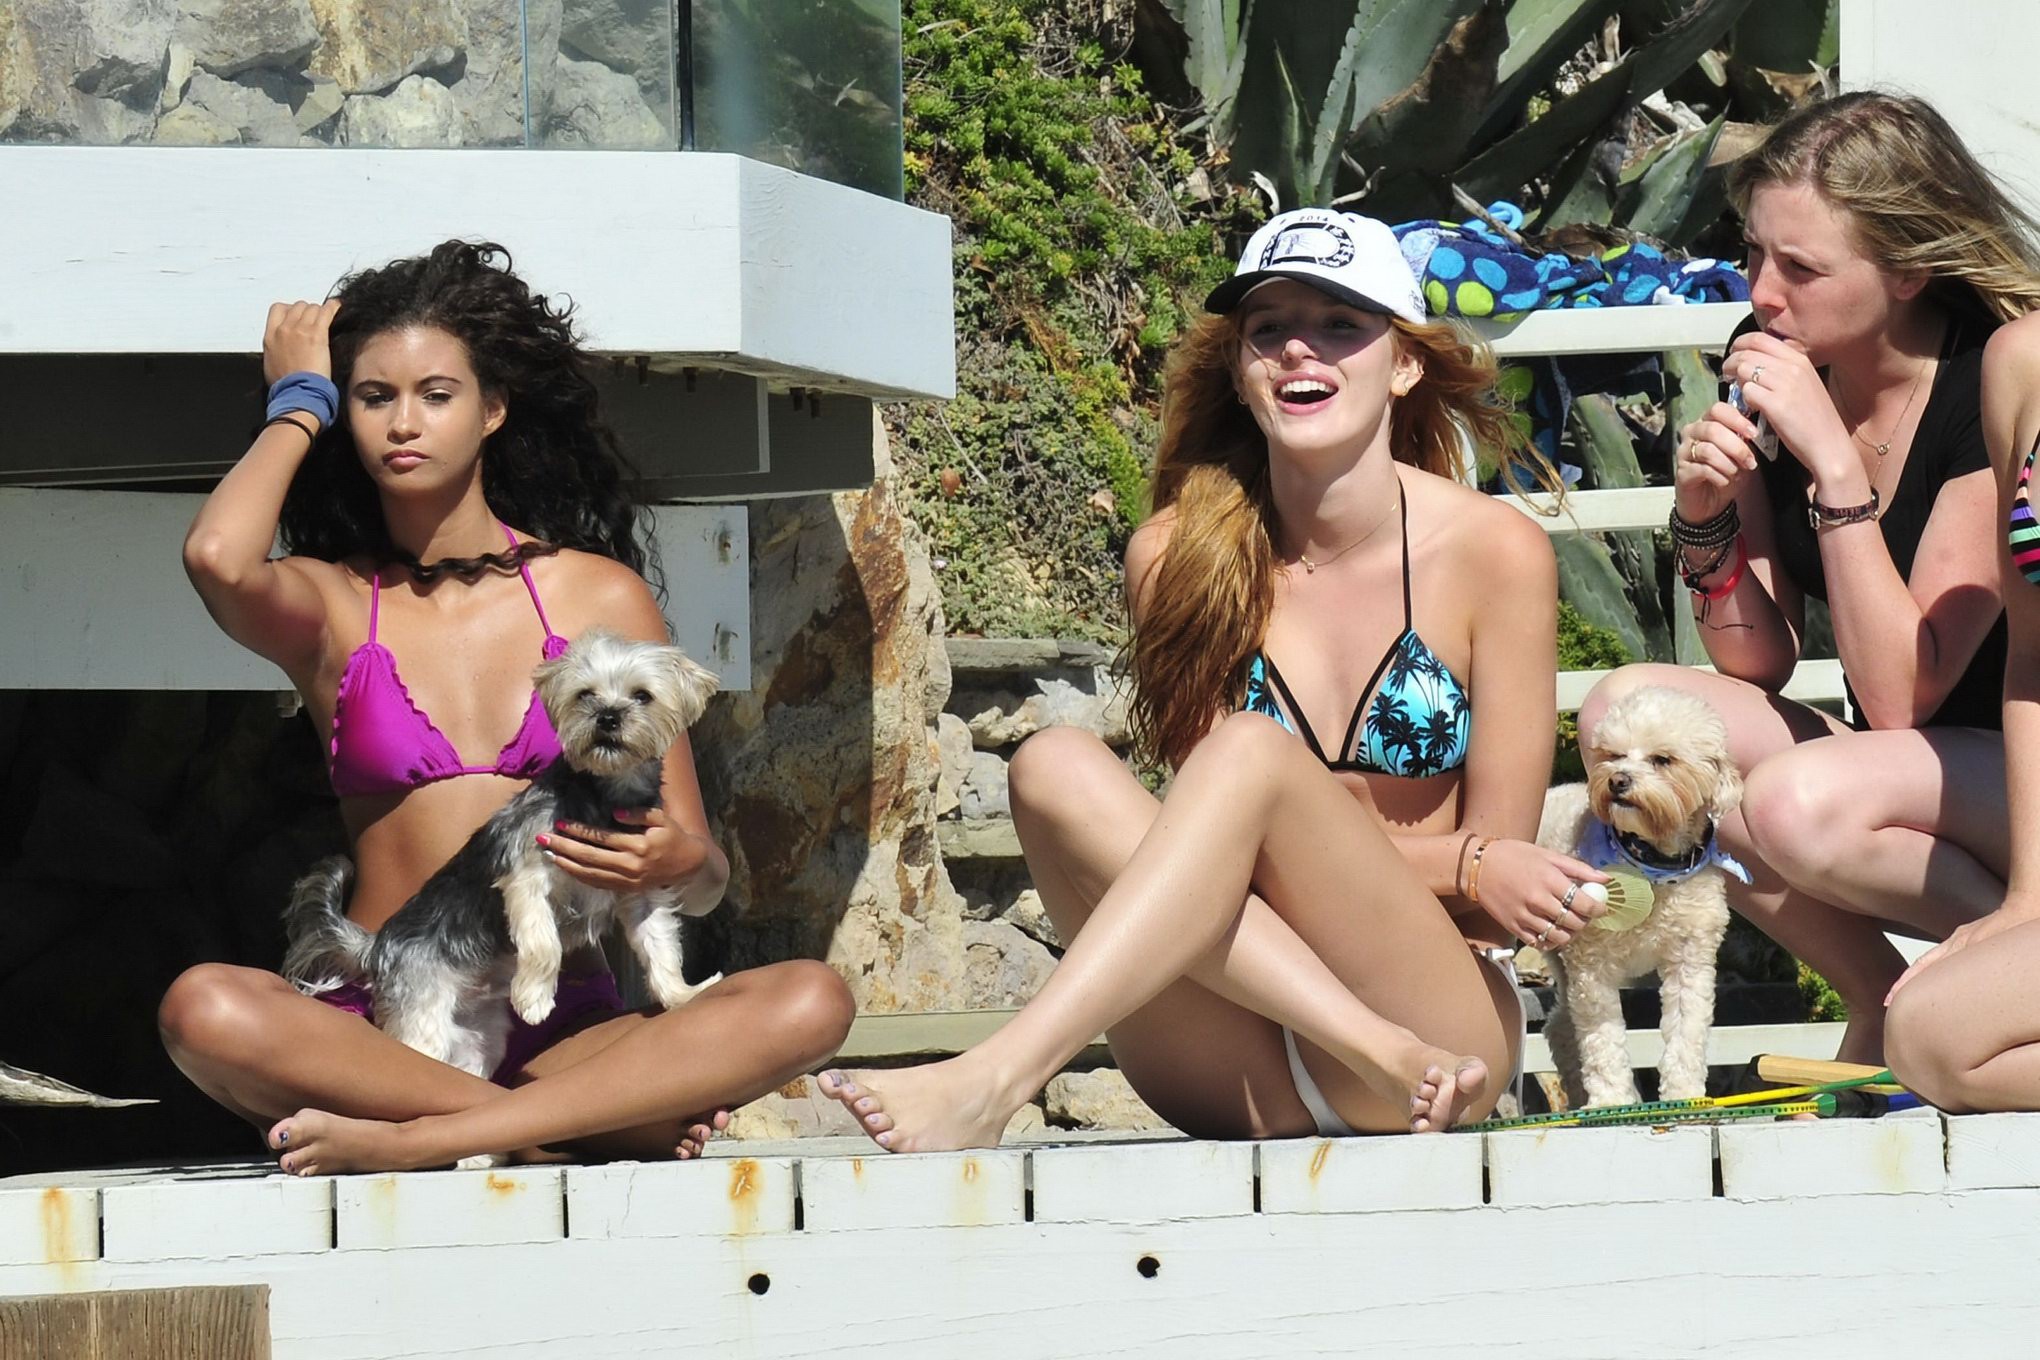 Bella Thorne having fun with her hot friends in tiny bikinis at a beach house in #75187965